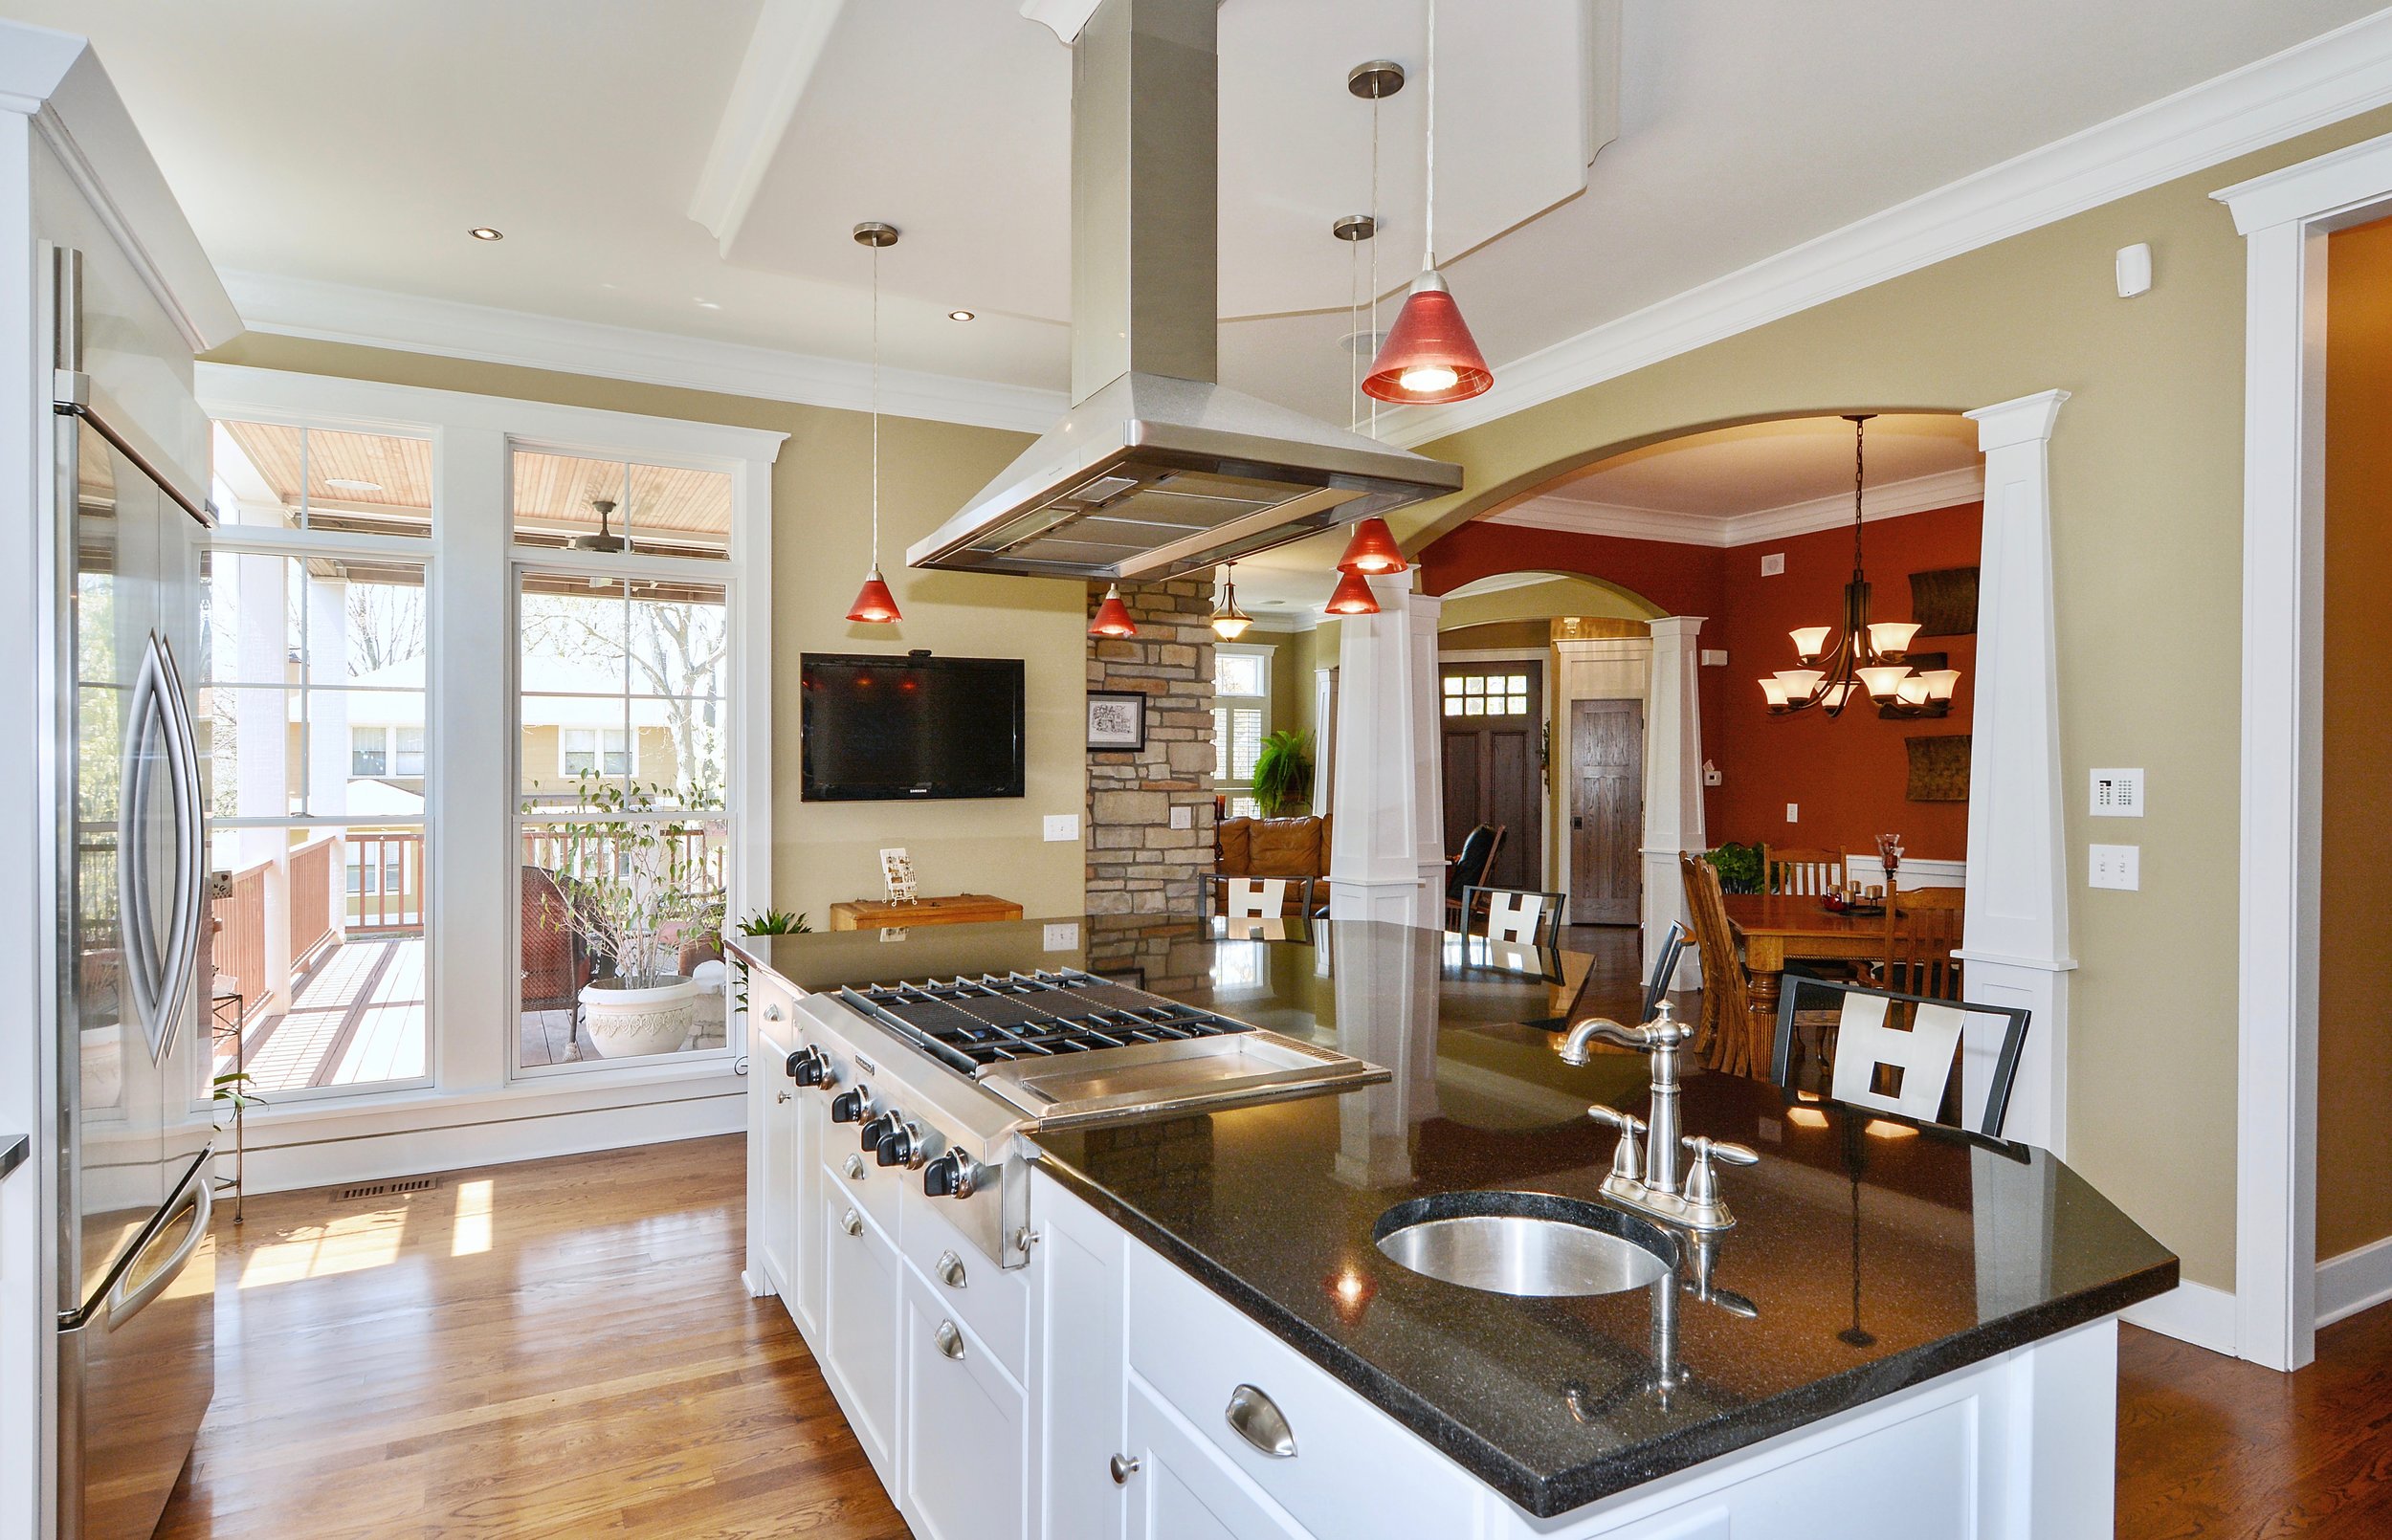 ISLAND COOK TOP WITH HOOD FROM CEILING